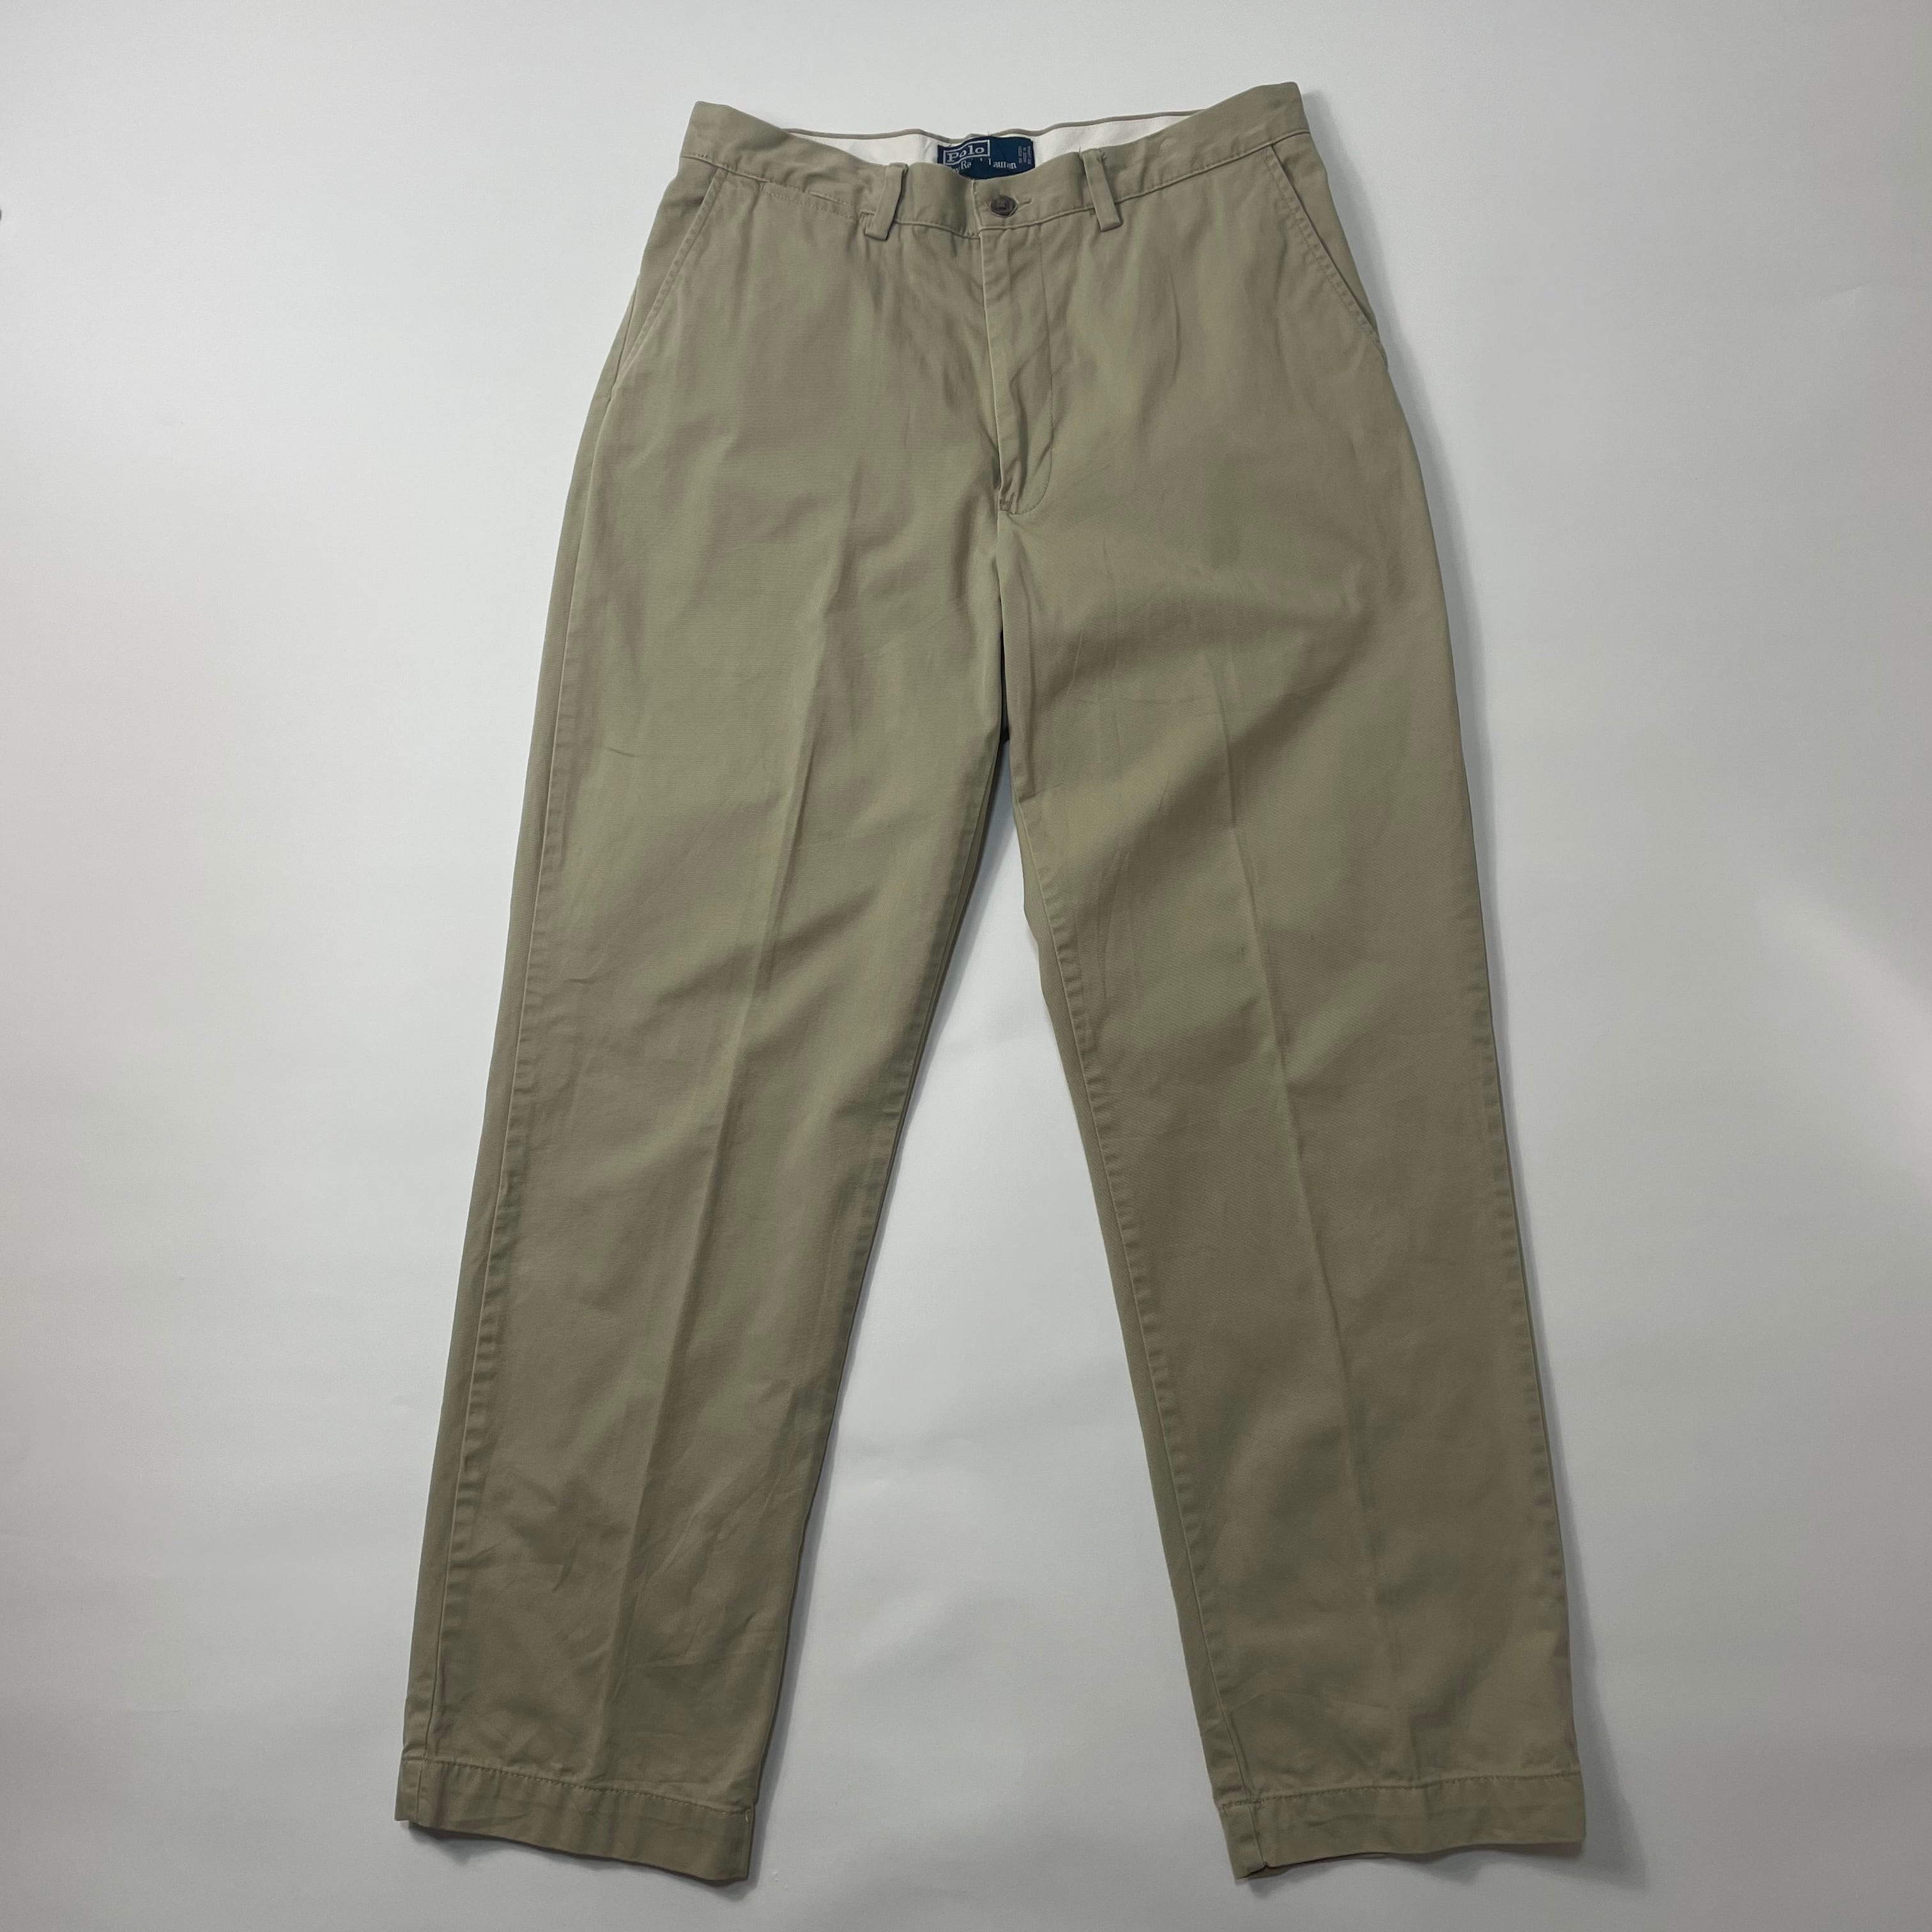 90's POLO Ralph Lauren classic chino pants | What The Hell